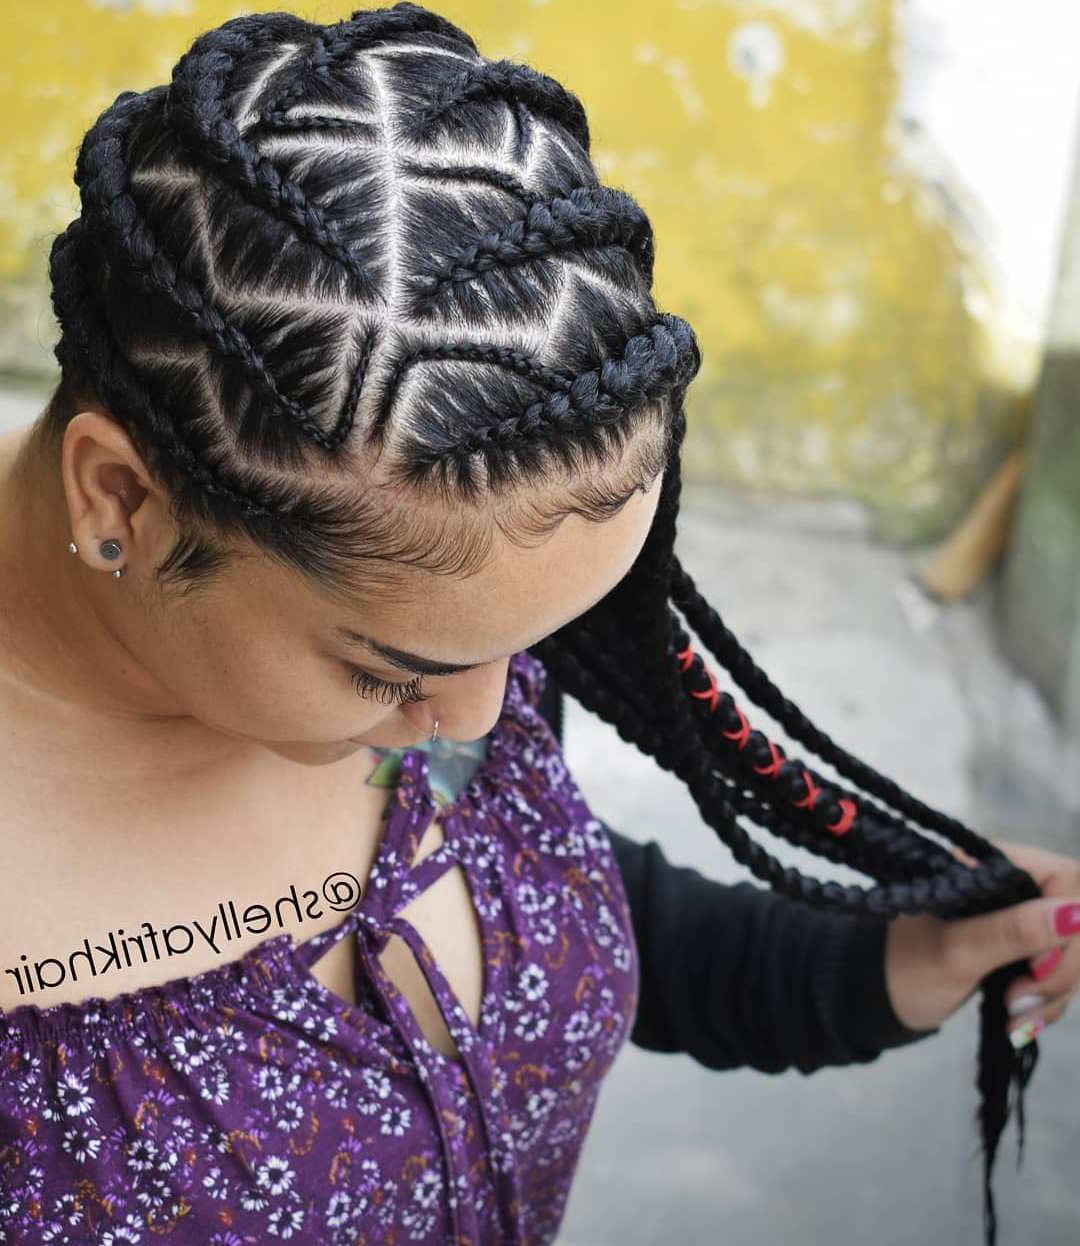 20 Head Turning Lemonade Braid Styles For All Ages Within Current Curved Goddess Braids Hairstyles (View 18 of 20)